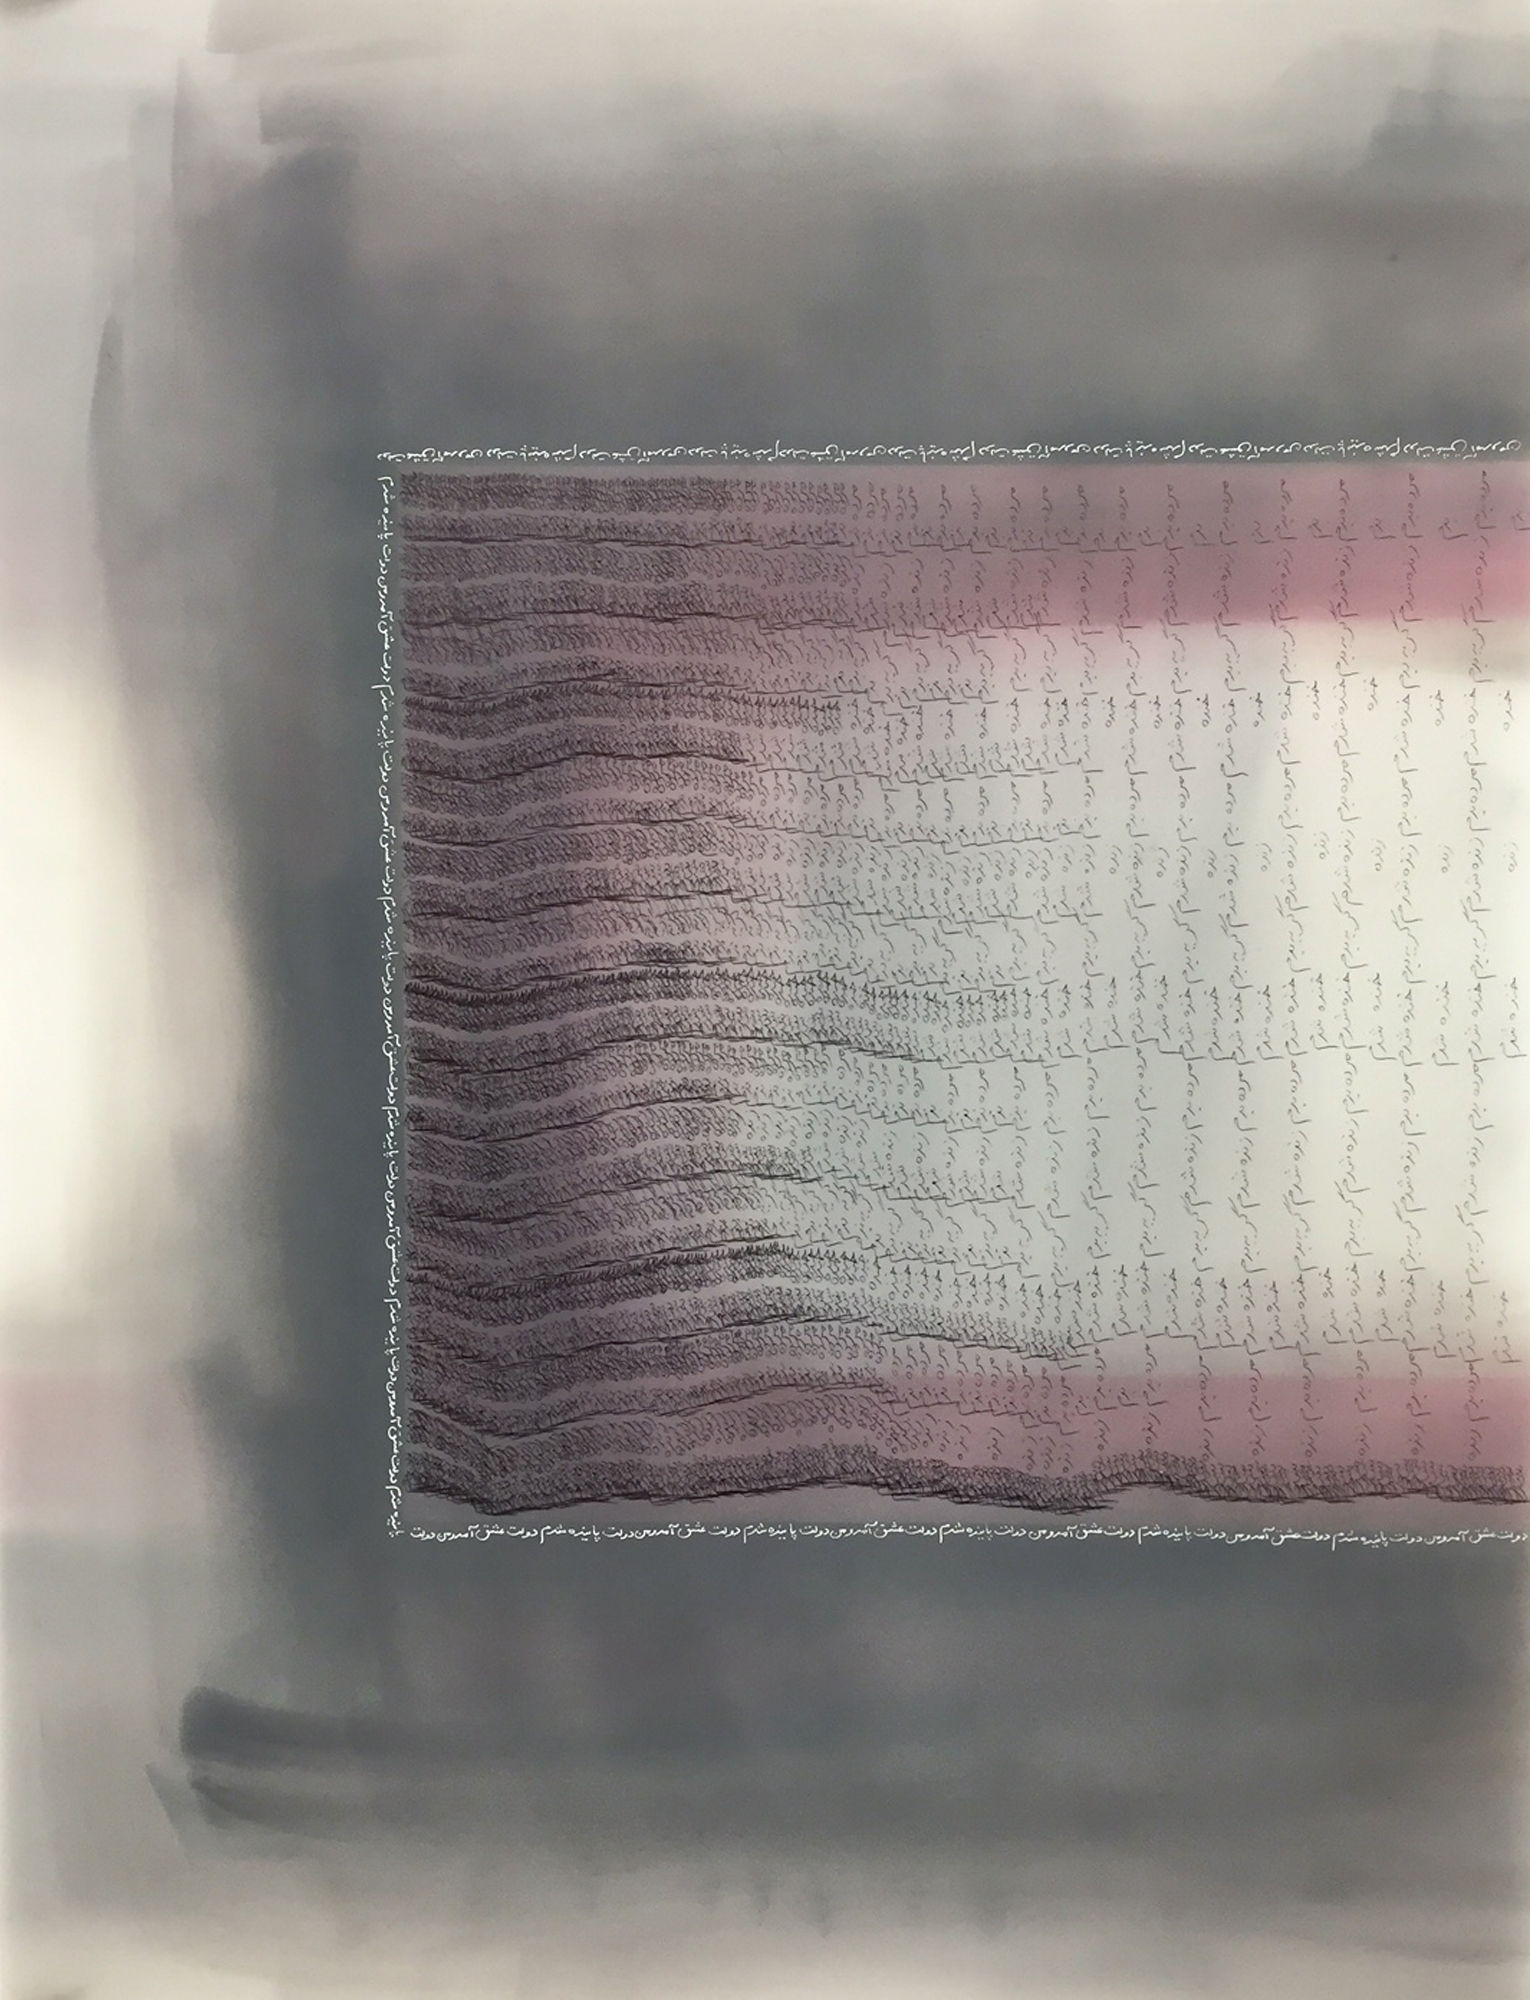   I am alive III,&nbsp;2016   Pan pastel and pen on two layers of frosted Mylar, 24” x 17 1/2” 